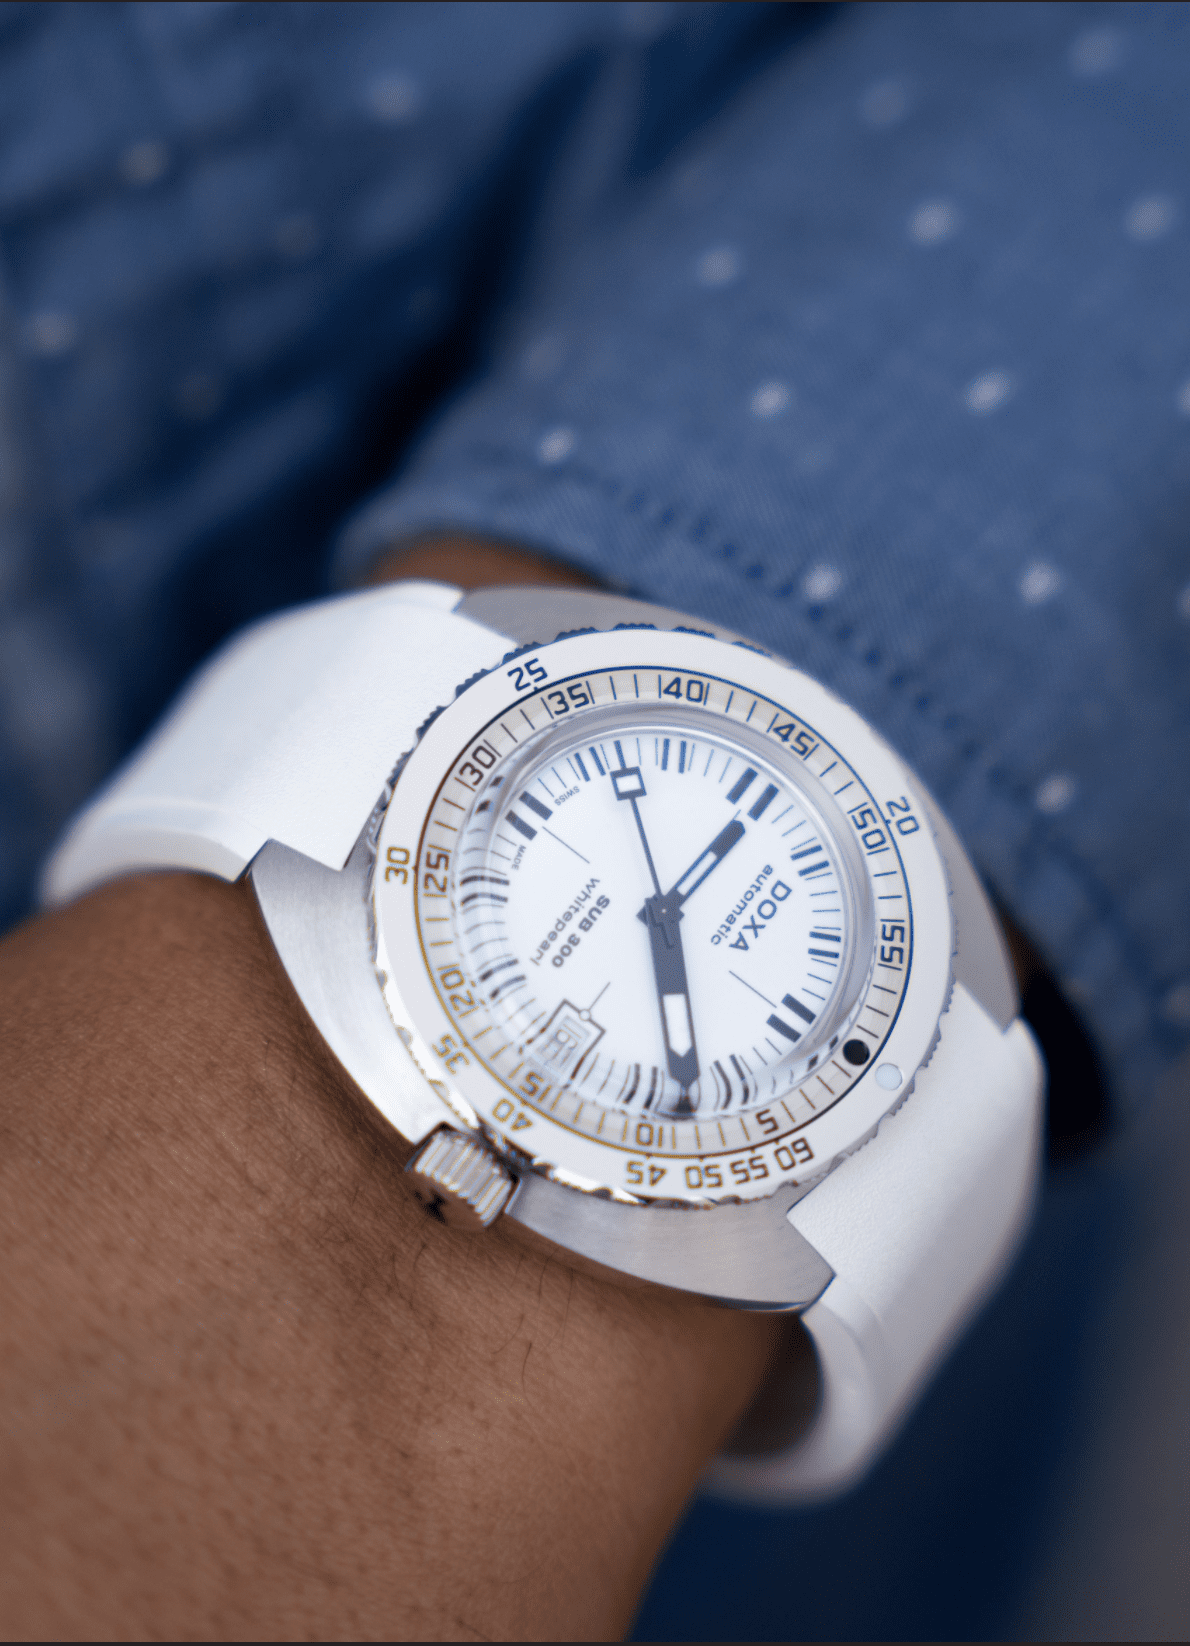 WATCHES & WONDERS – It’s a whitewash! The DOXA Whitepearl expands into multiple forms